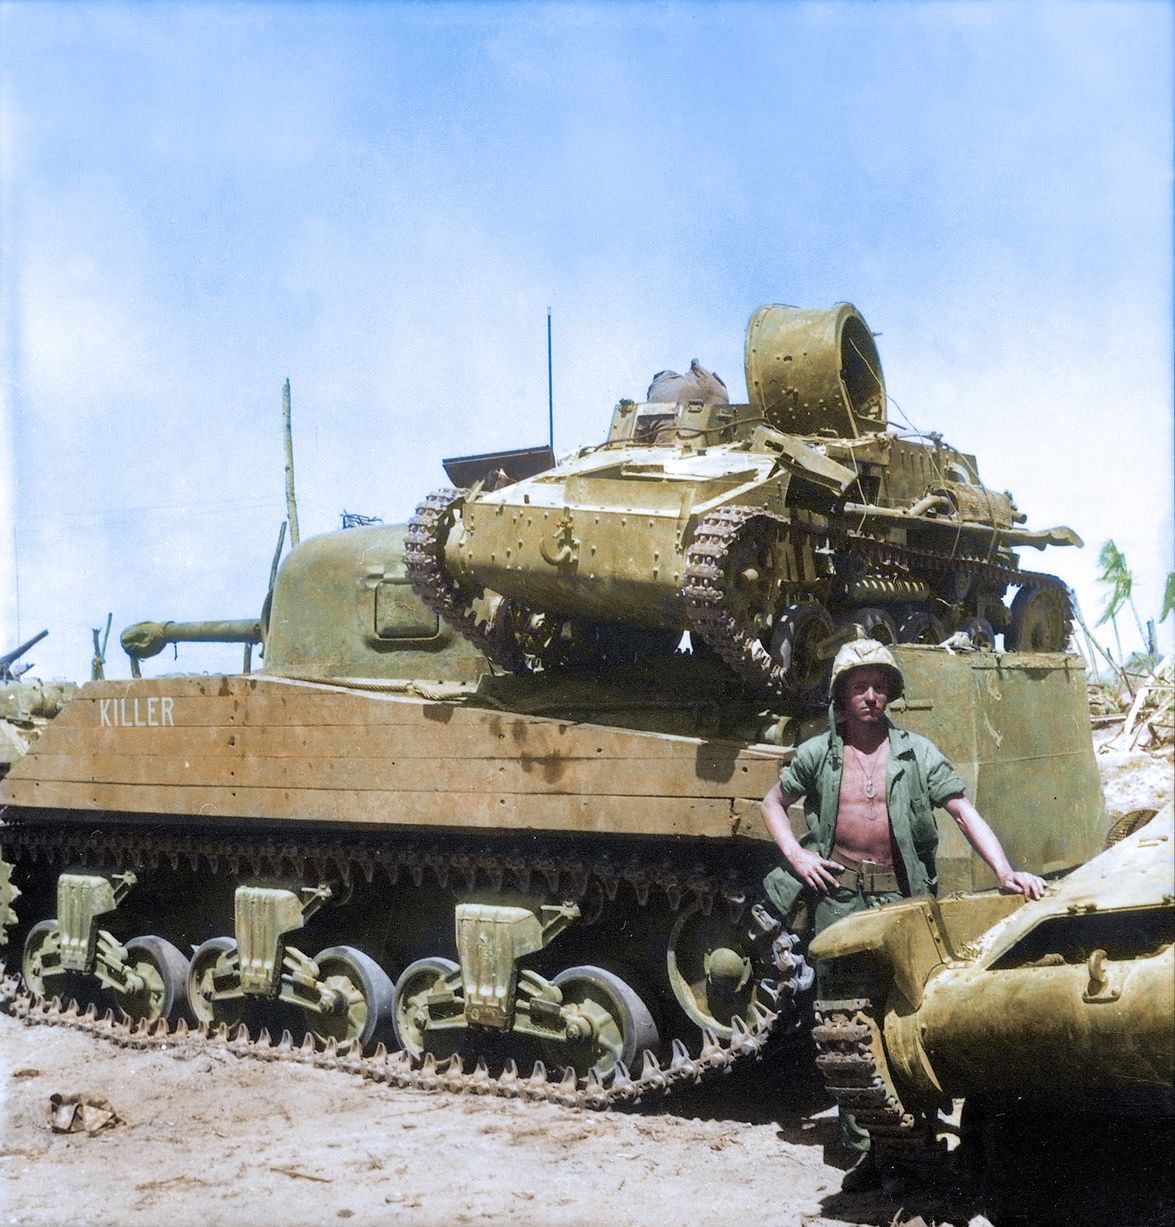 Private First Class N. E. Carling stands beside the American M4 Sherman medium tank 'Killer' on Kwajalein Atoll.